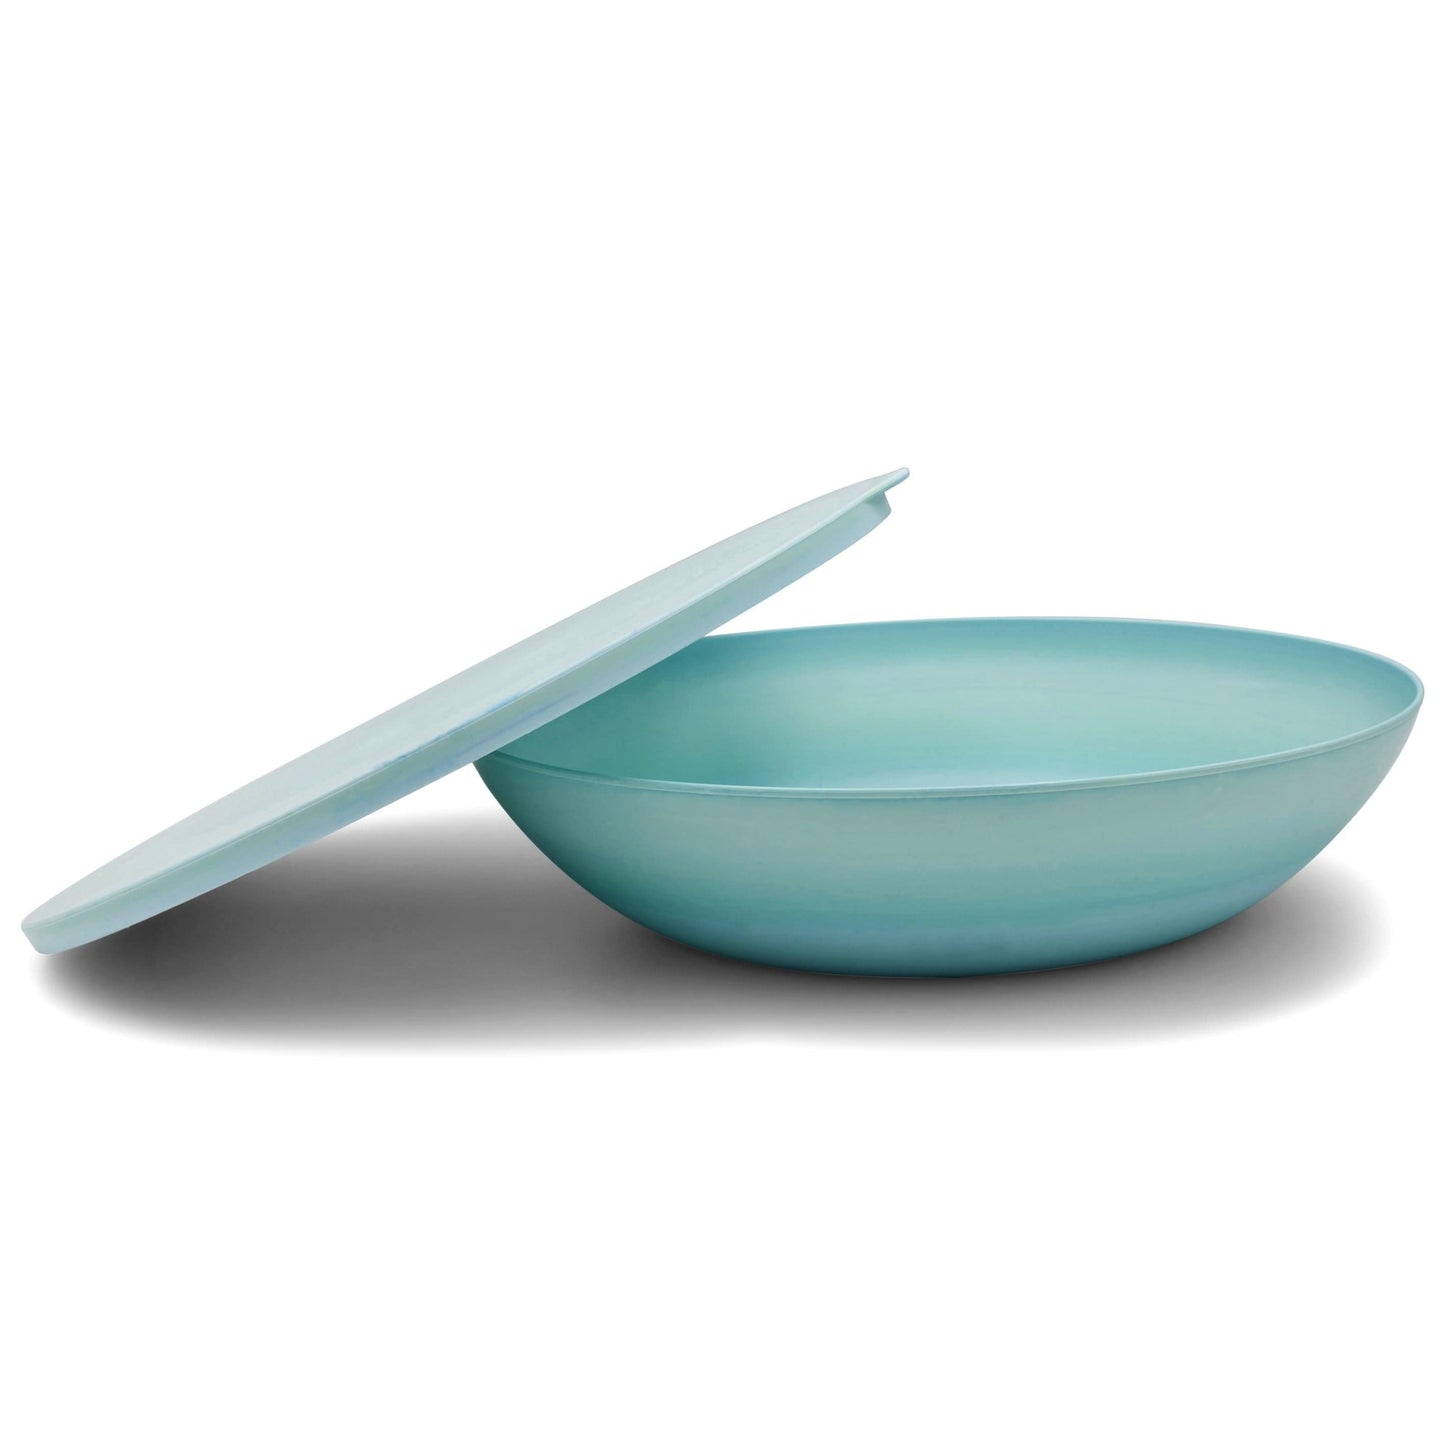 Serving bowl with a lid — the round Teal